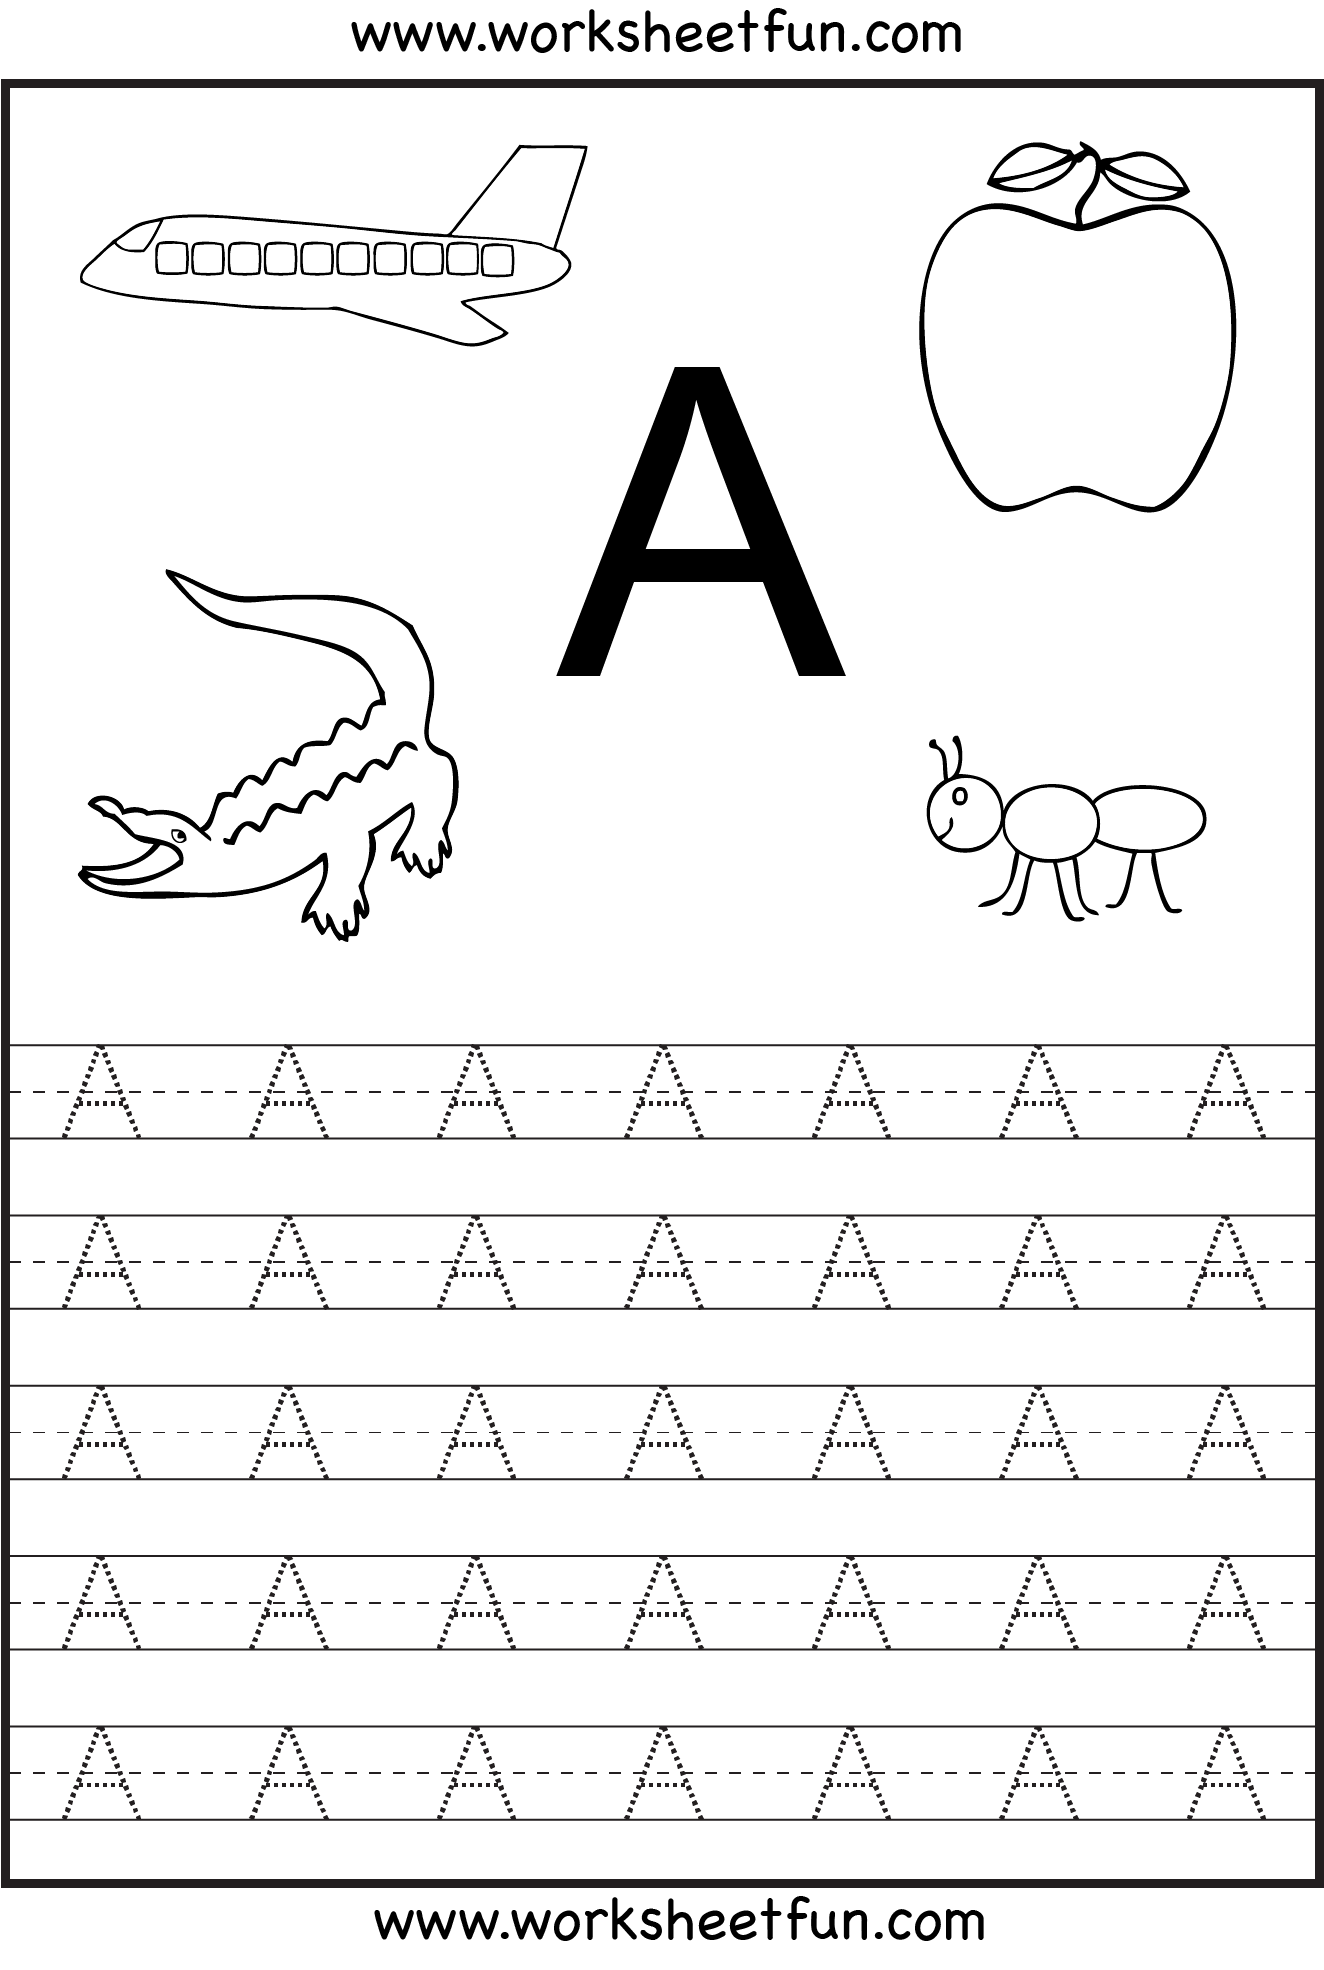 11 Best Images Of Dots Letter B Worksheet Connect The Dots Letters Worksheets Printable 